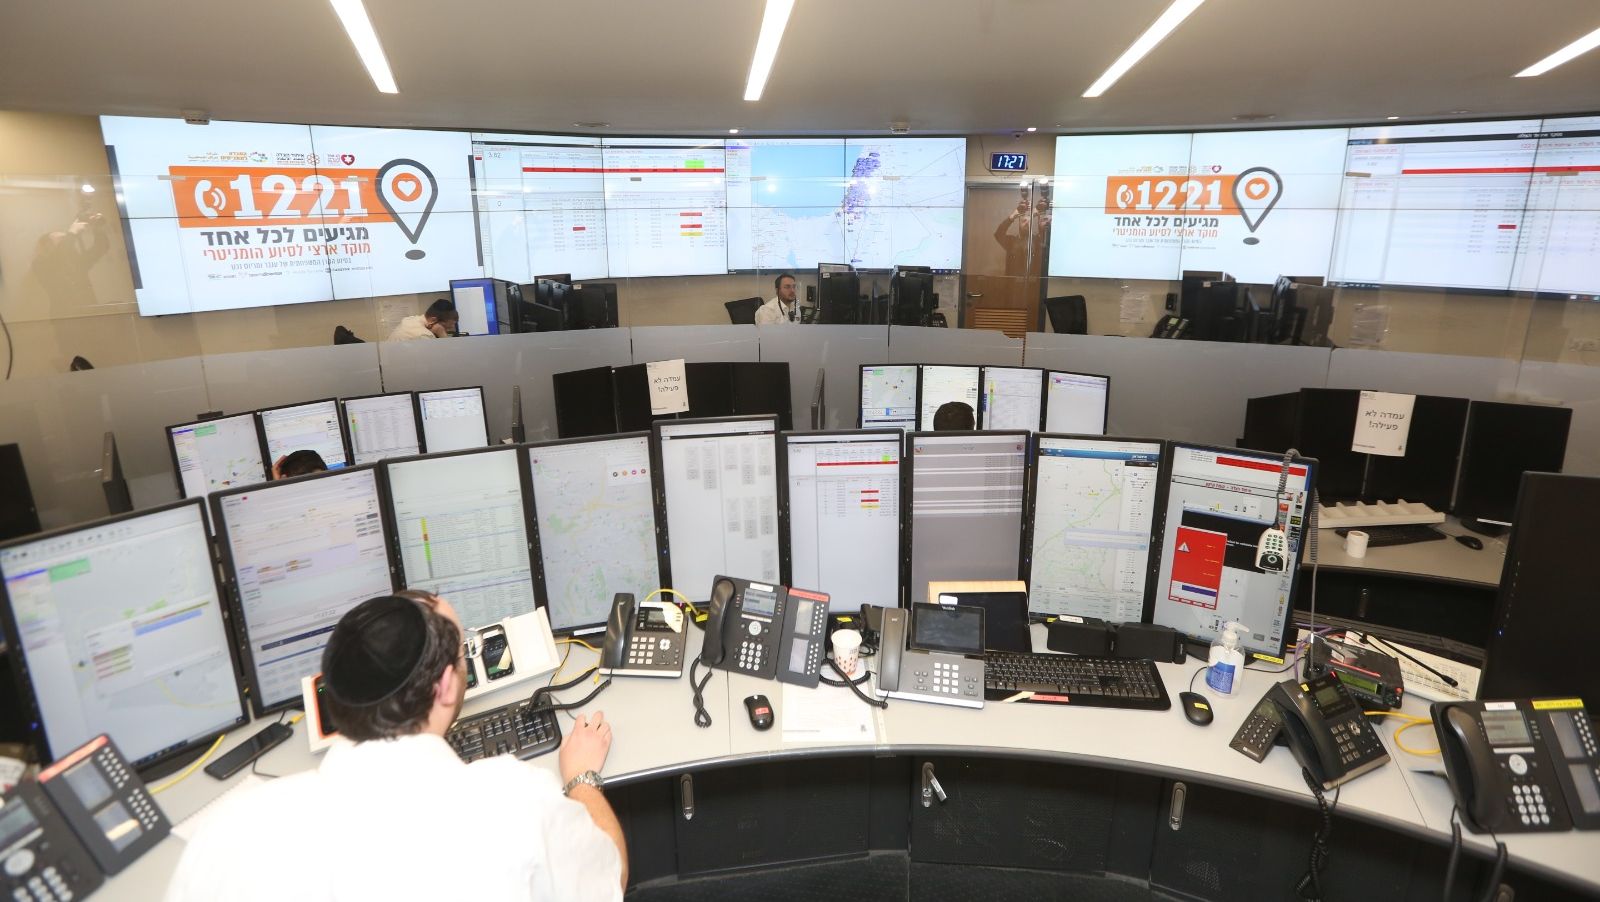 The 1221 Assistance for All dispatch center that was opened as Israel battles coronavirus. Photo: courtesy